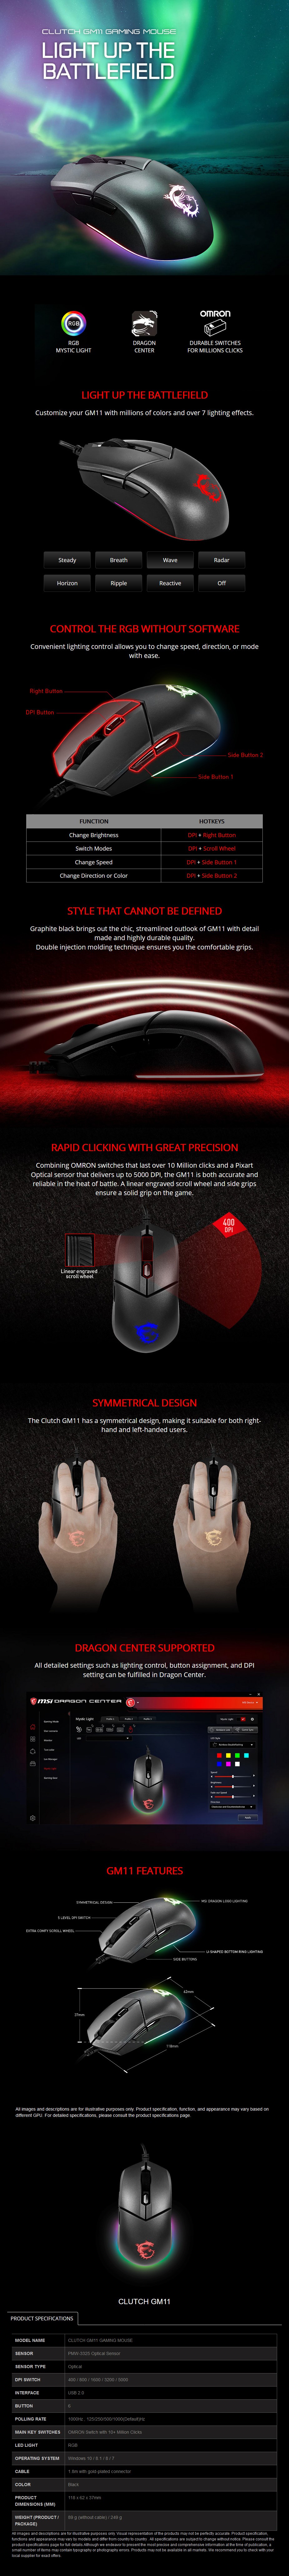 MSI Clutch GM11 Wired Optical Gaming Mouse - Overview 1